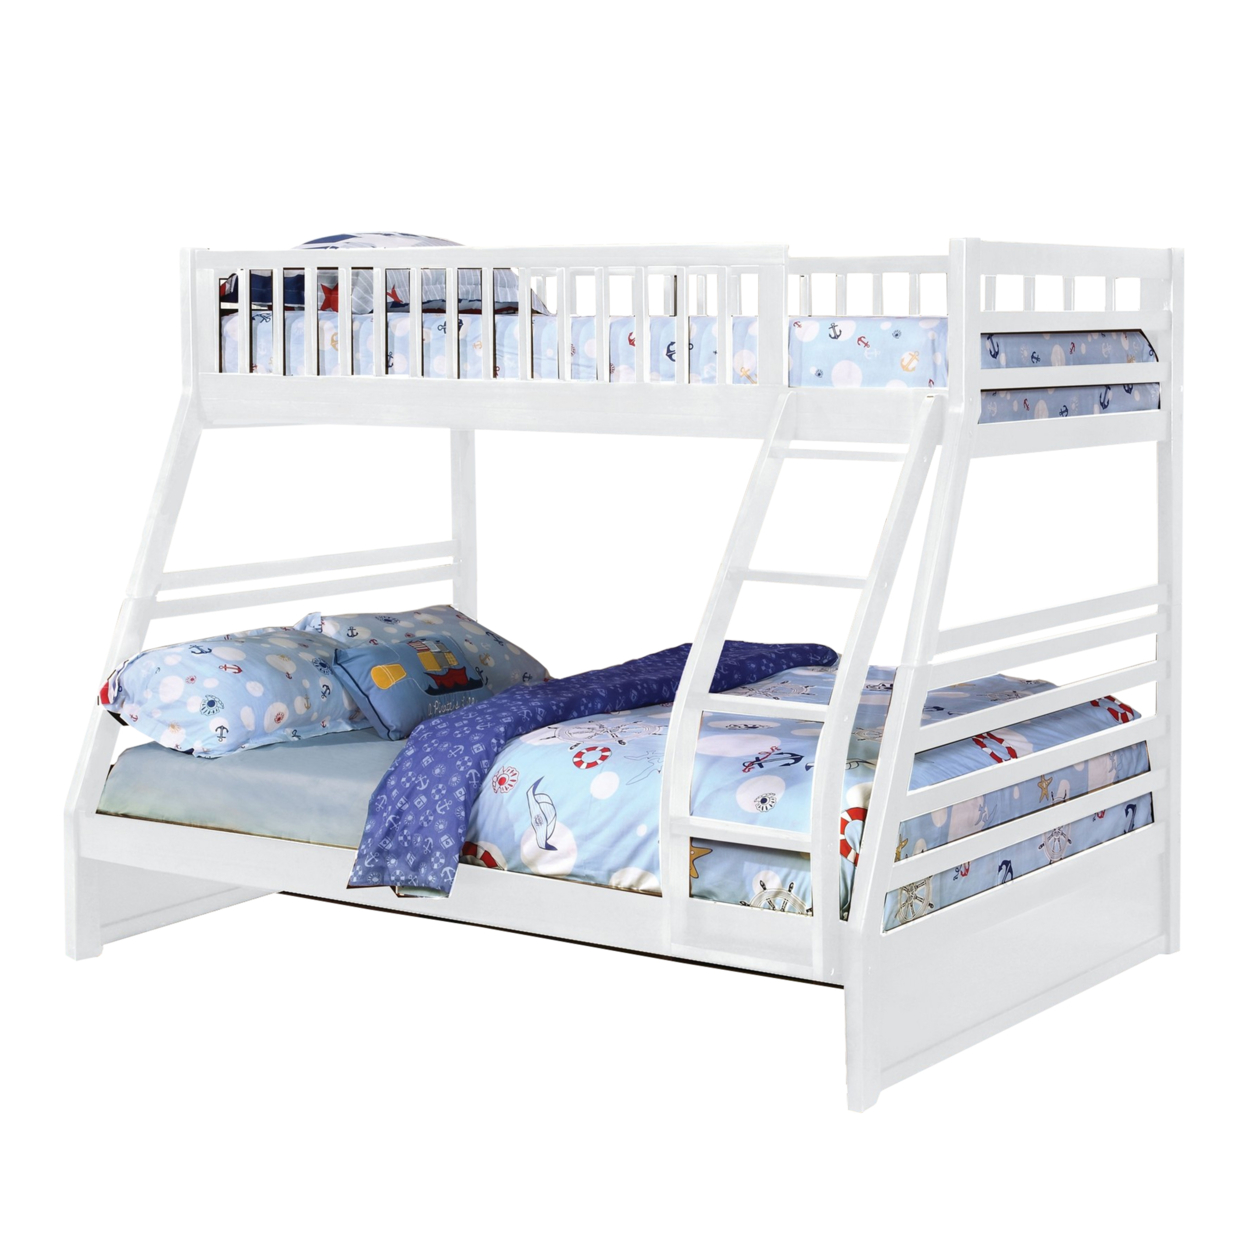 Wooden Twin Over Full Bunk Bed With Slatted Guardrails, White- Saltoro Sherpi